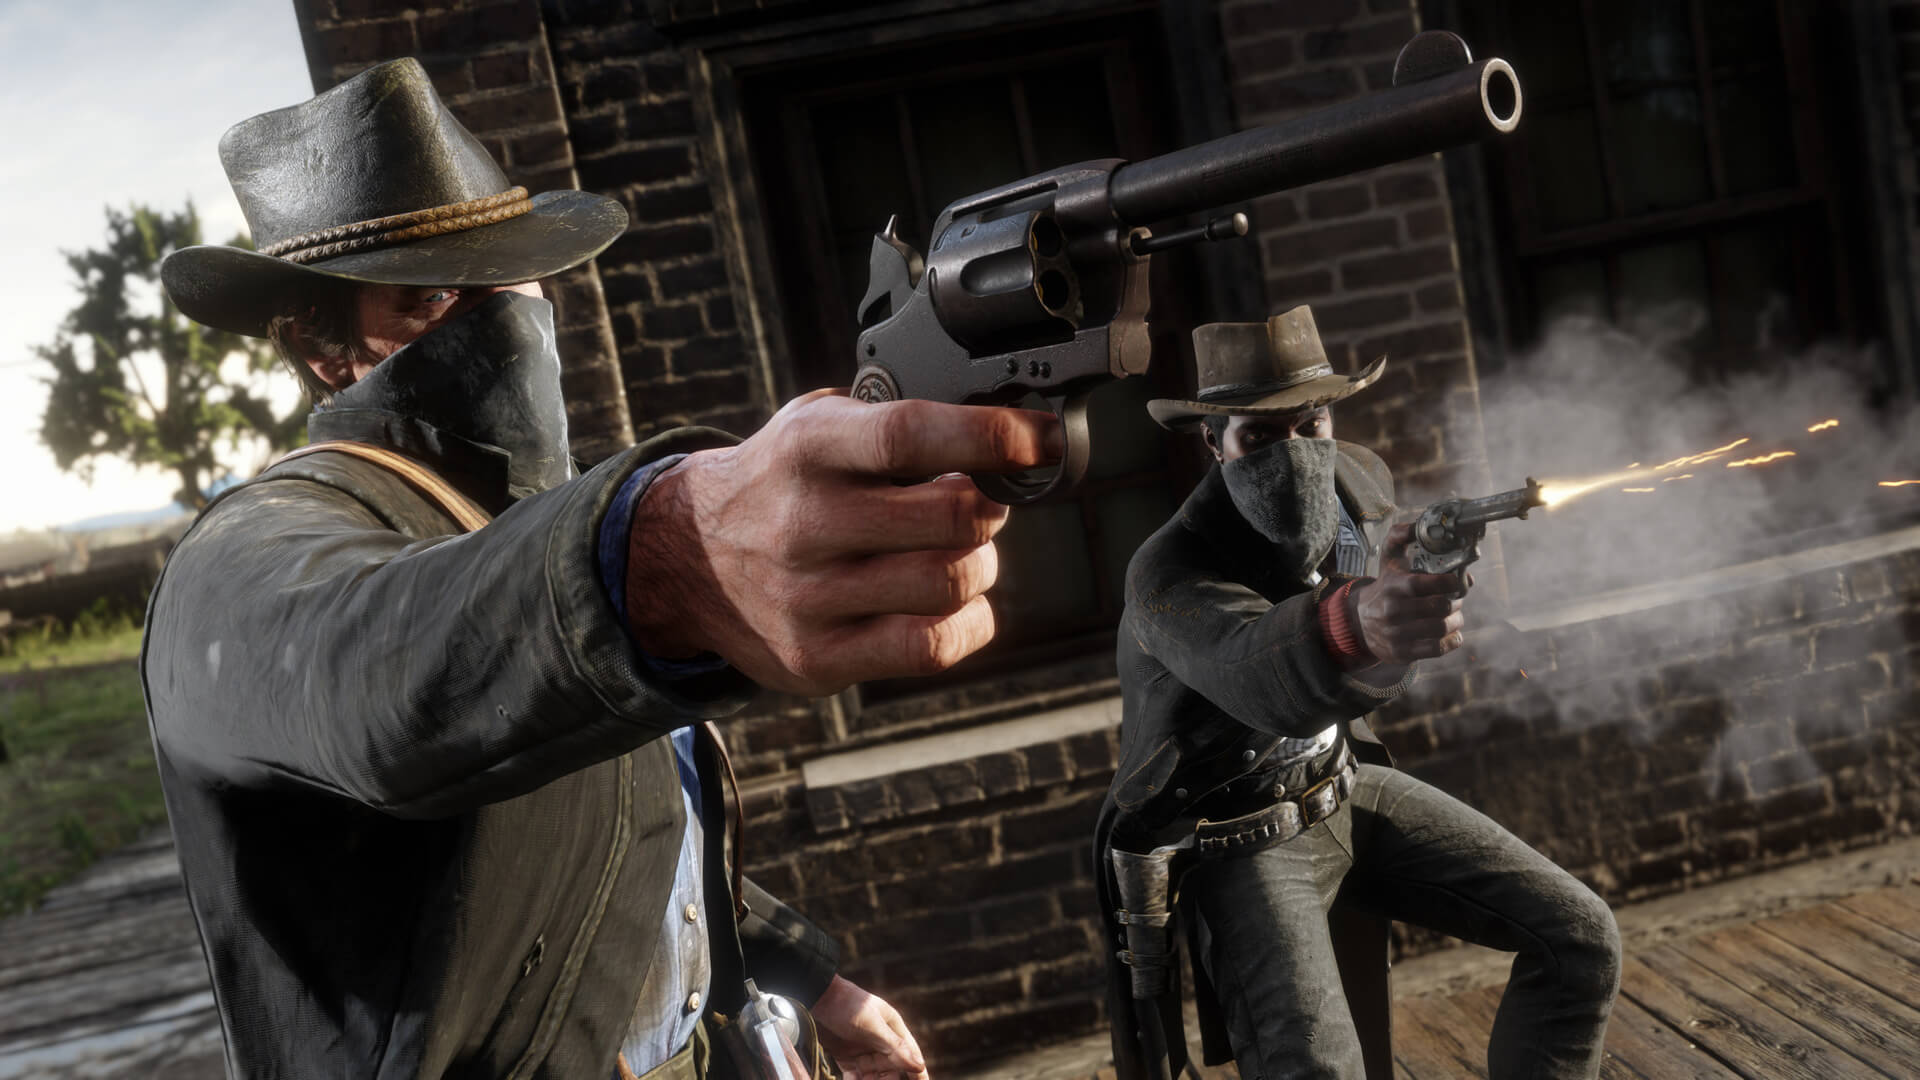 Slutning Incubus Tyr Script Hook & Native Trainer released for Red Dead Redemption 2, allows you  to do A LOT of things